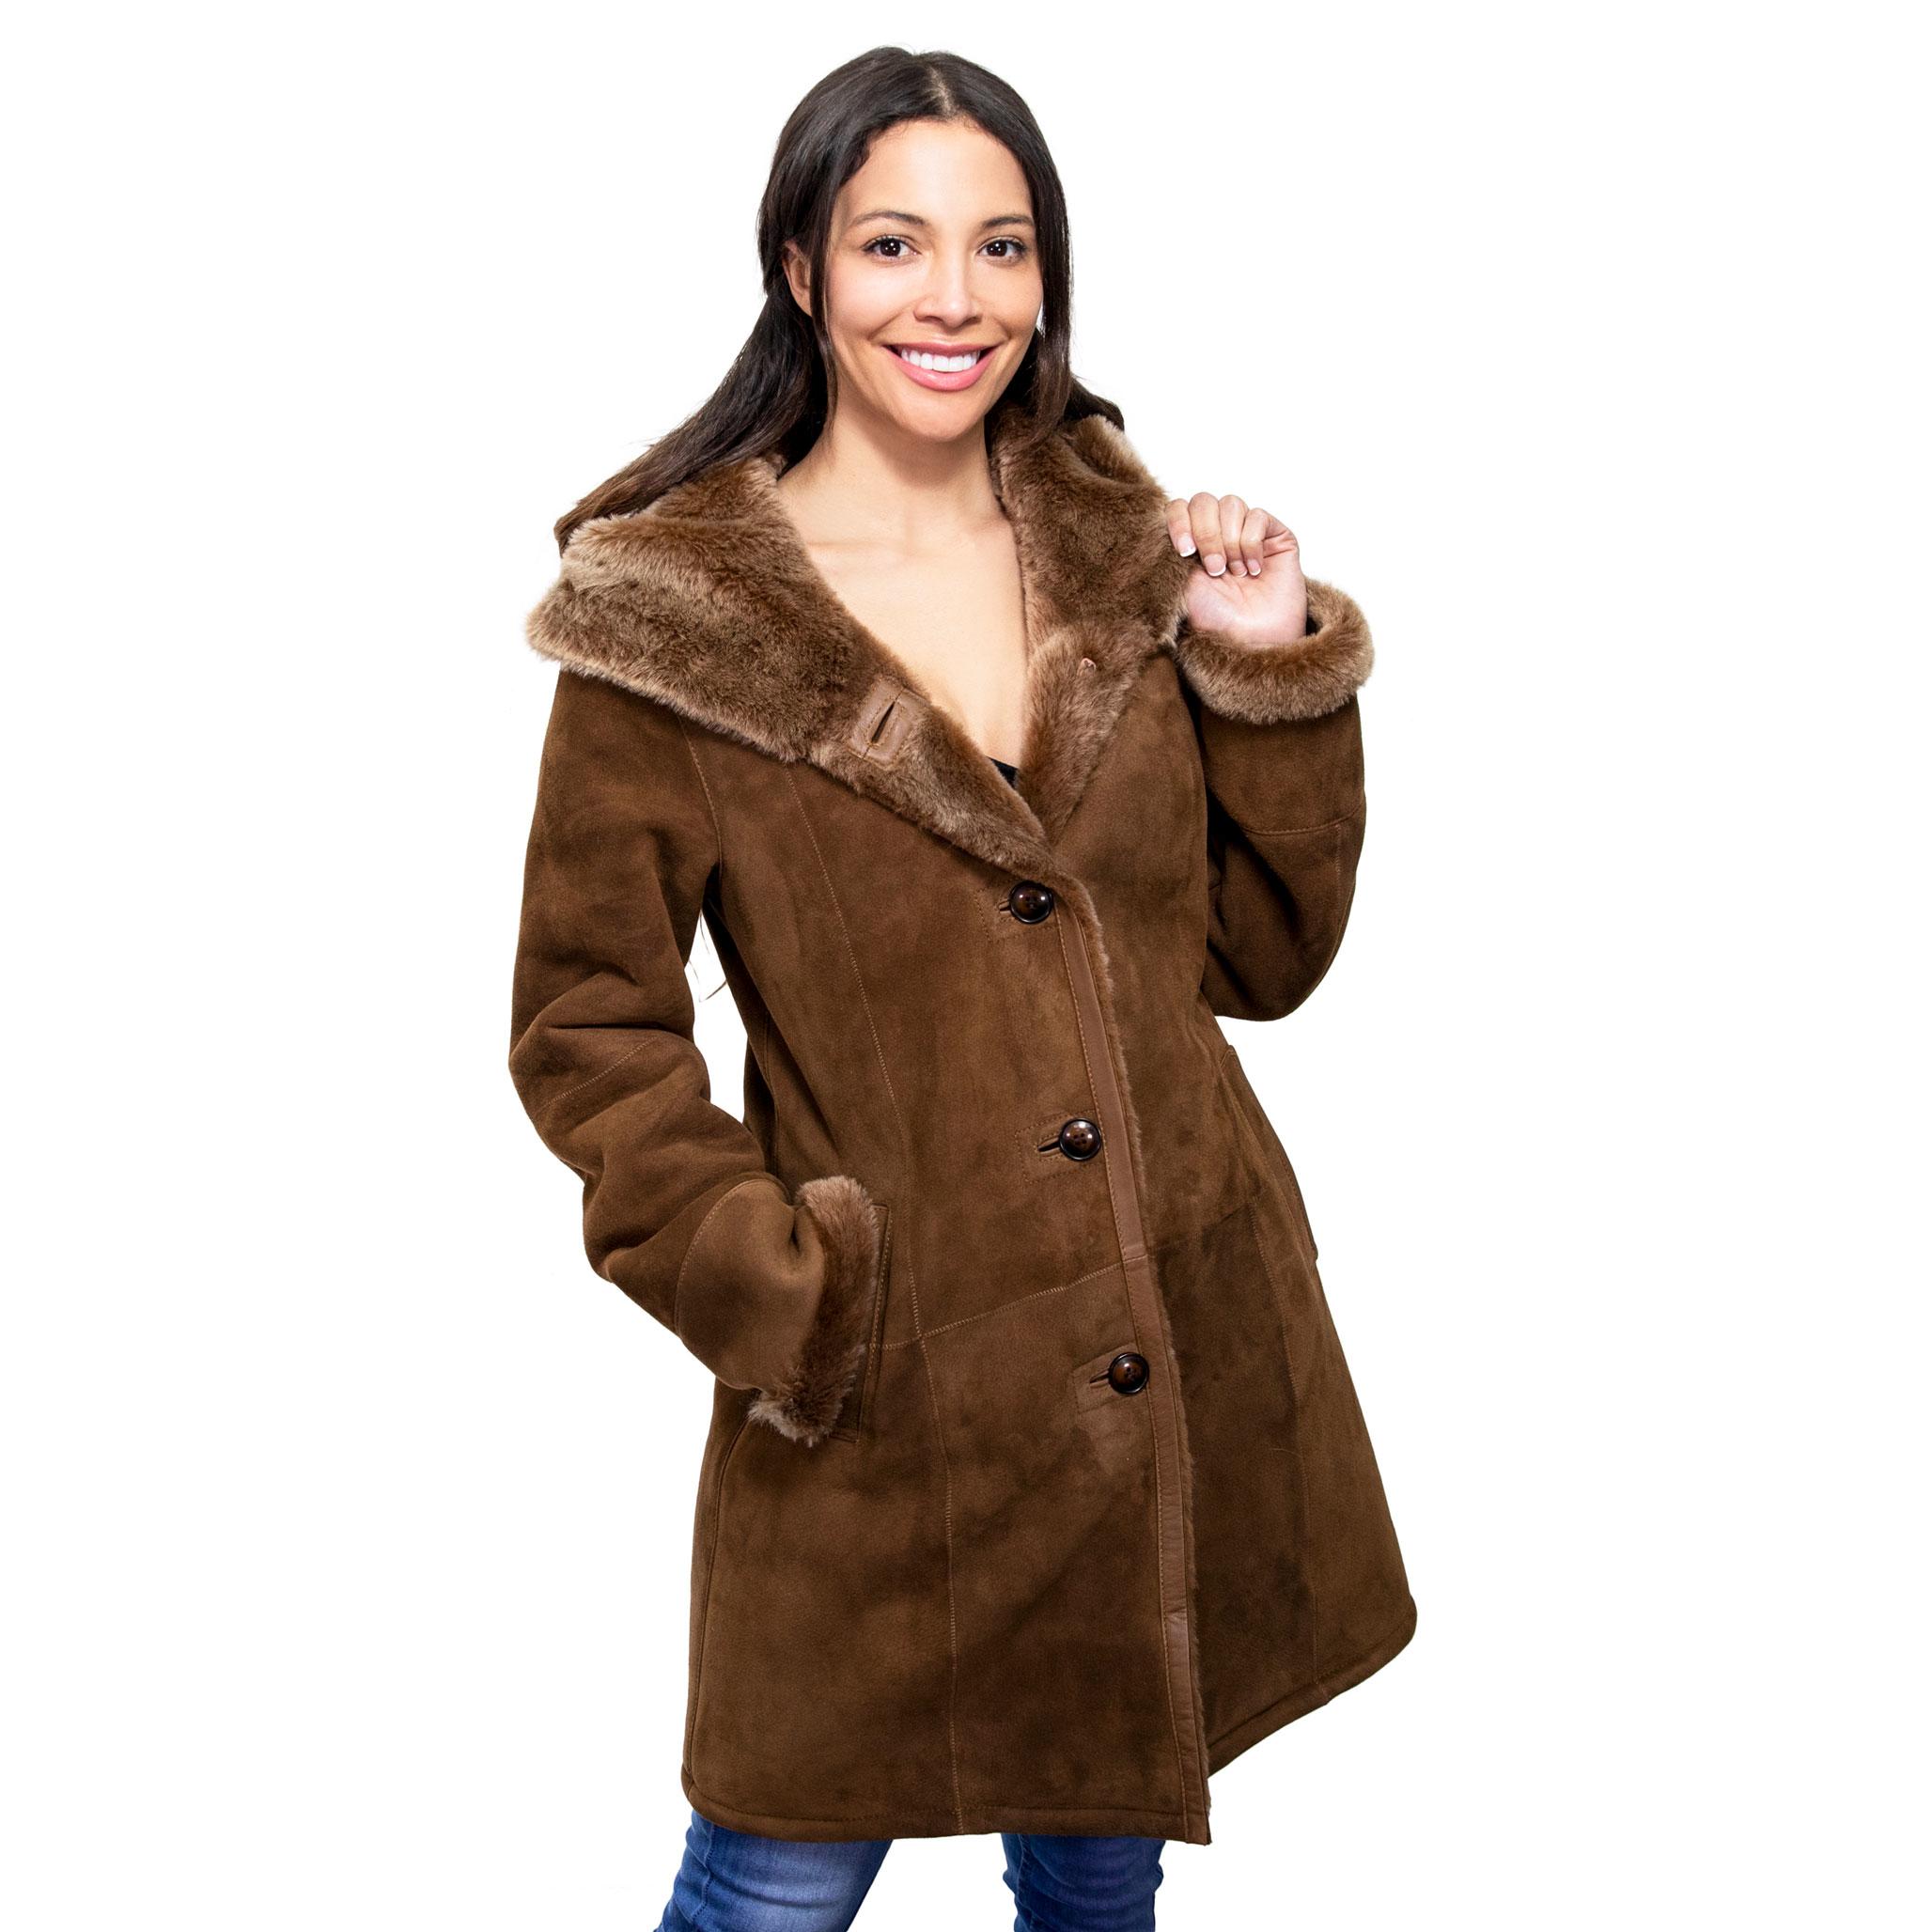 The model looks so delighted wearing a tan sheepskin coat, in a suede finish. The coat is hooded, with front buttoned fastening, with long, comfortable sleeves.